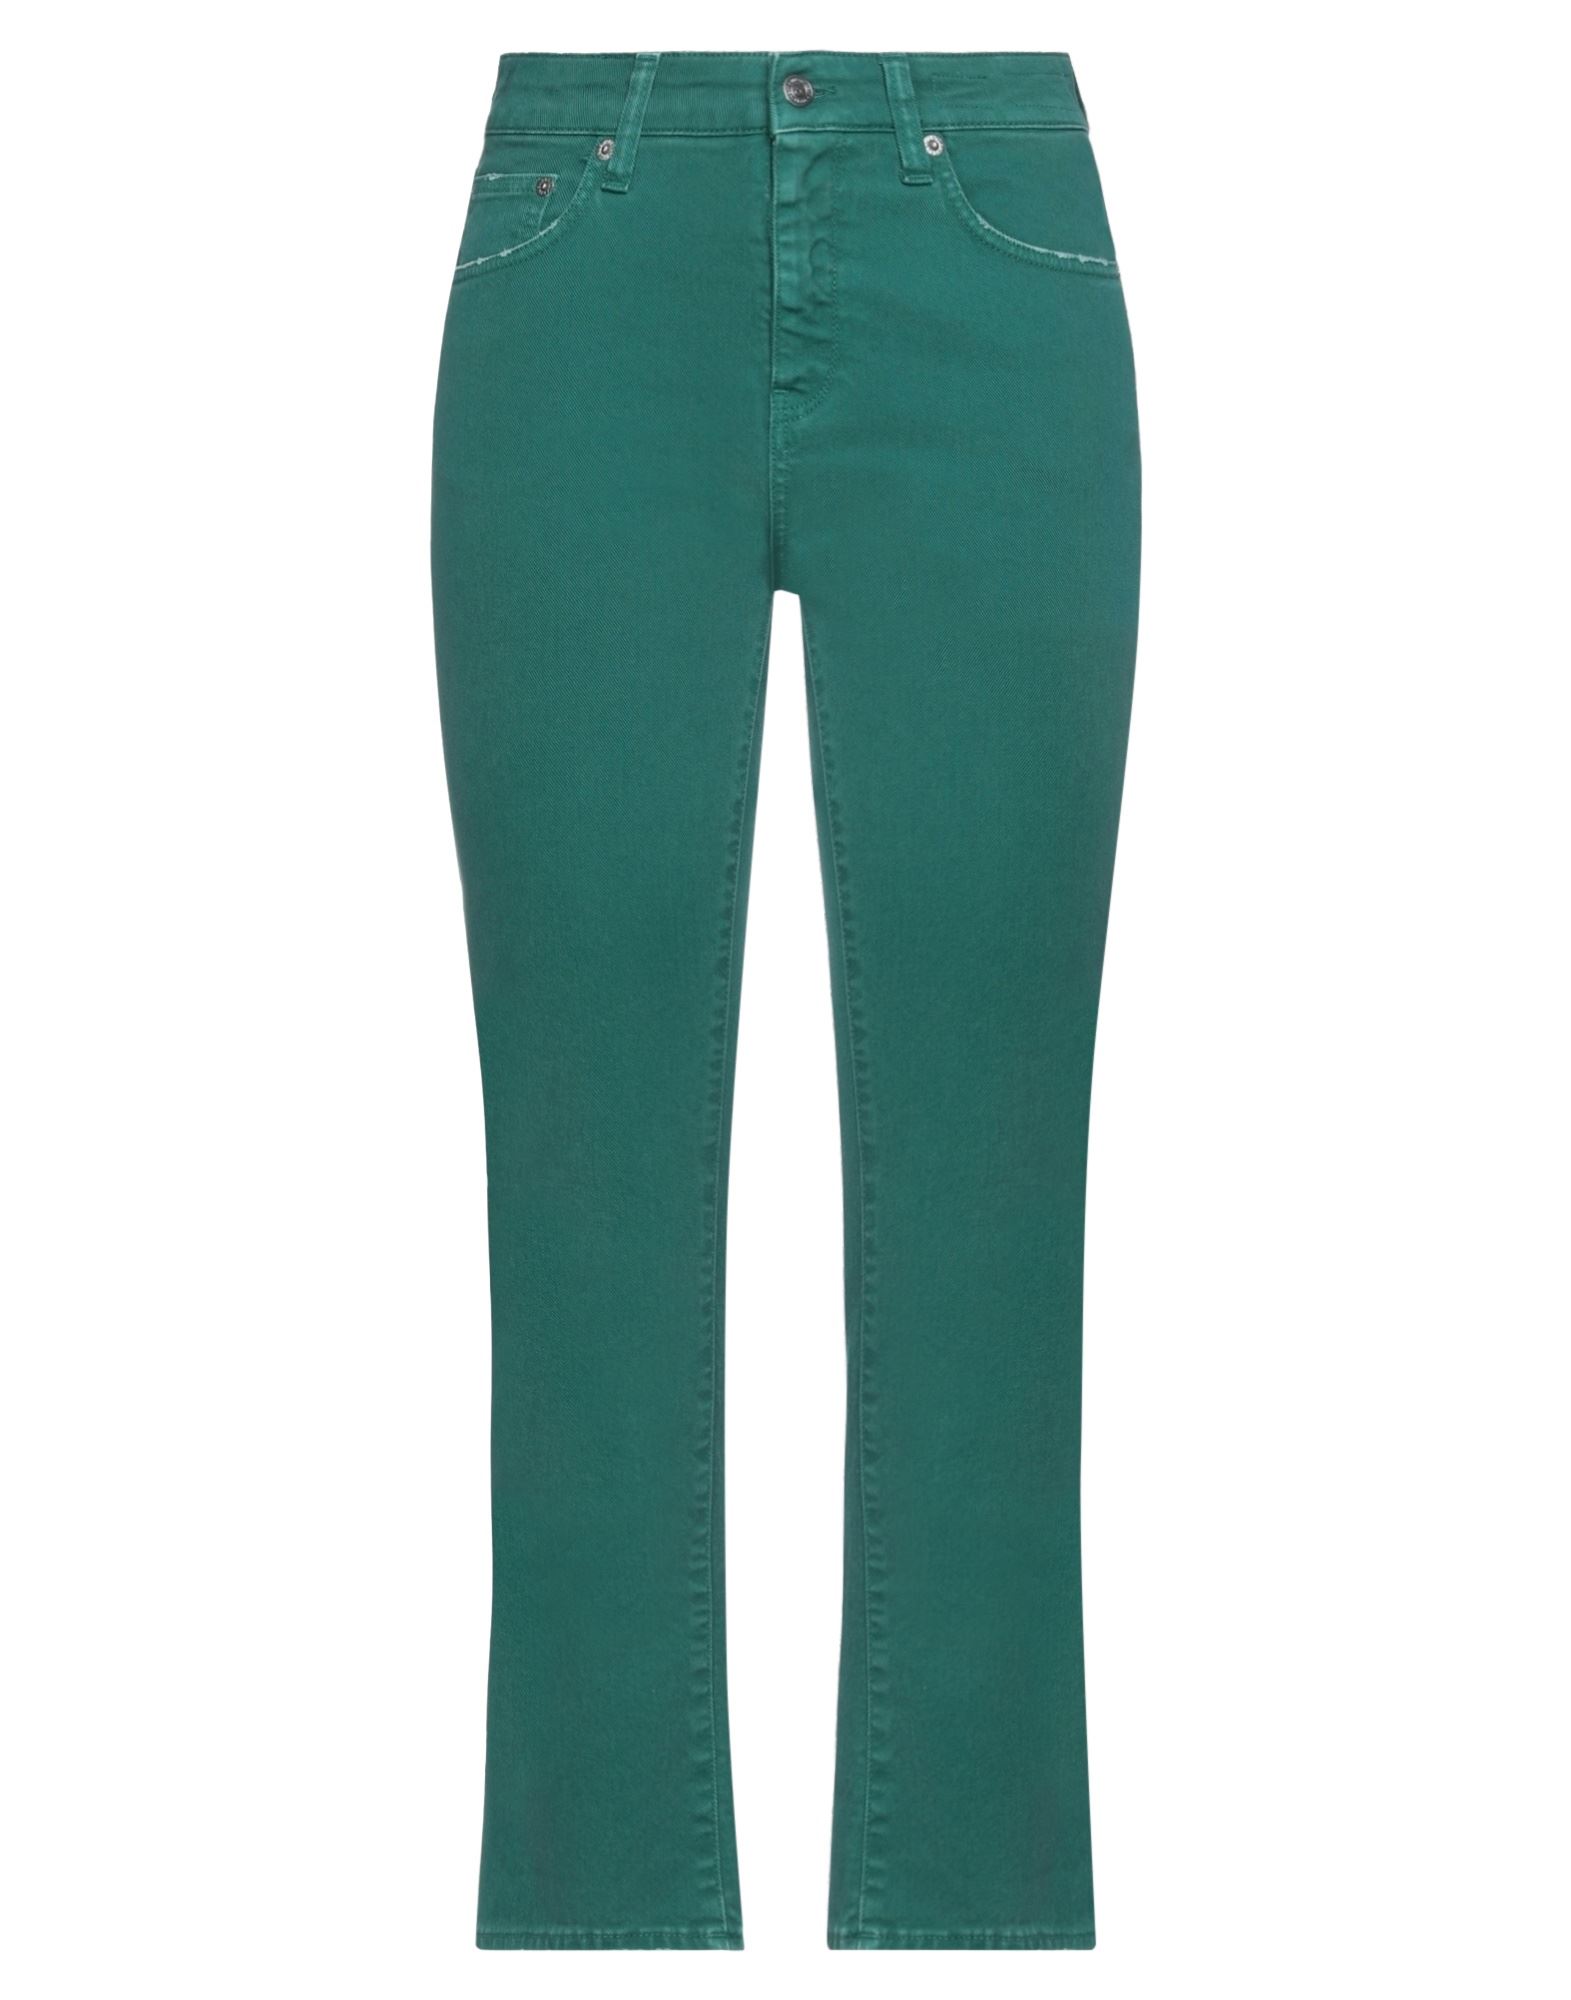 Department 5 Jeans In Emerald Green